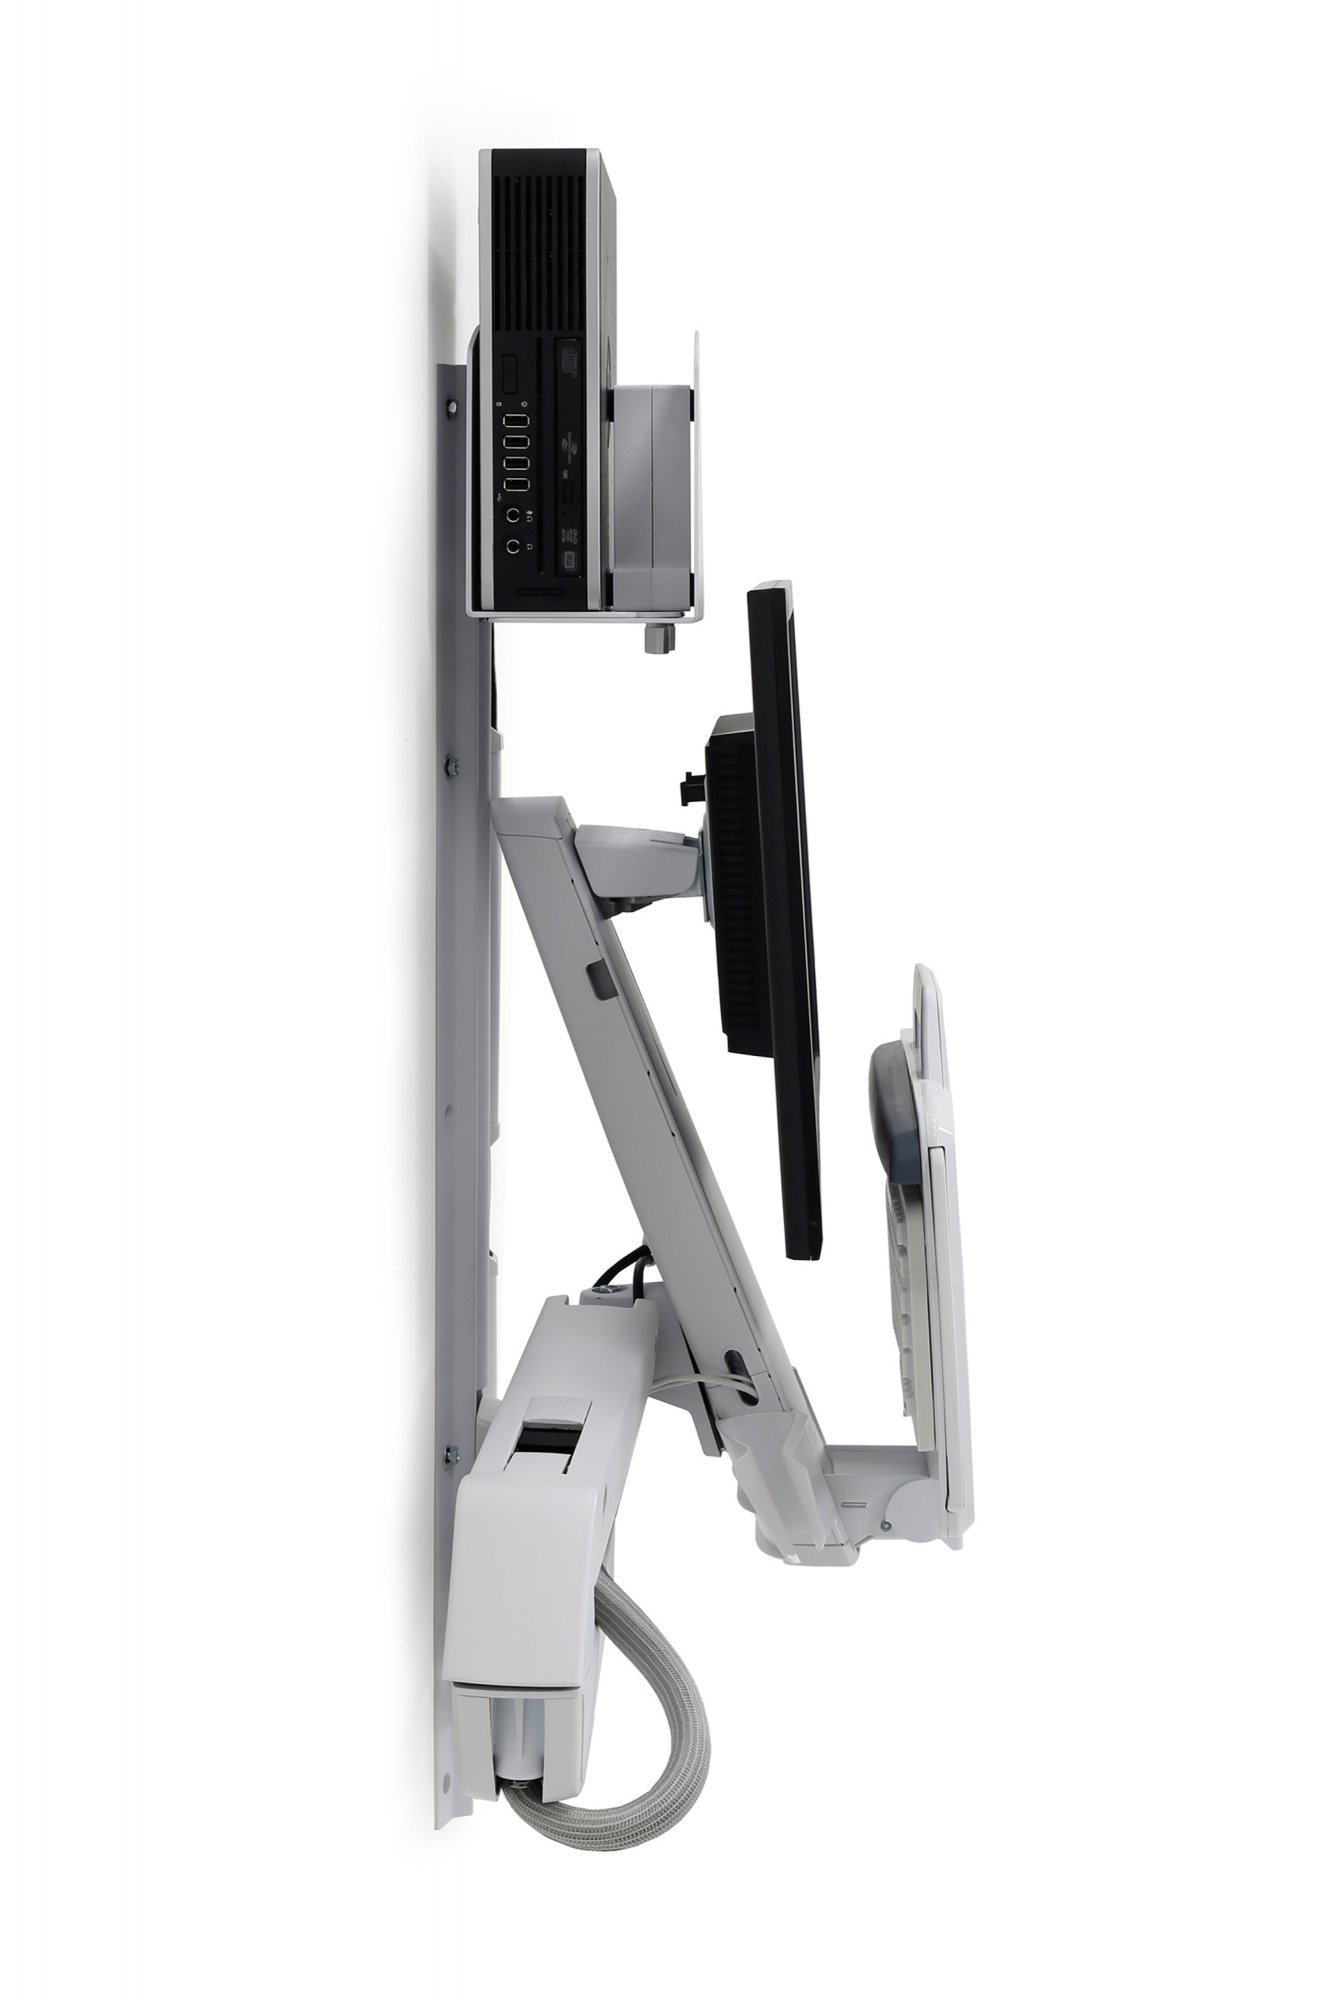 Ergotron 45-273-216 StyleView Sit-Stand Combo System (white)